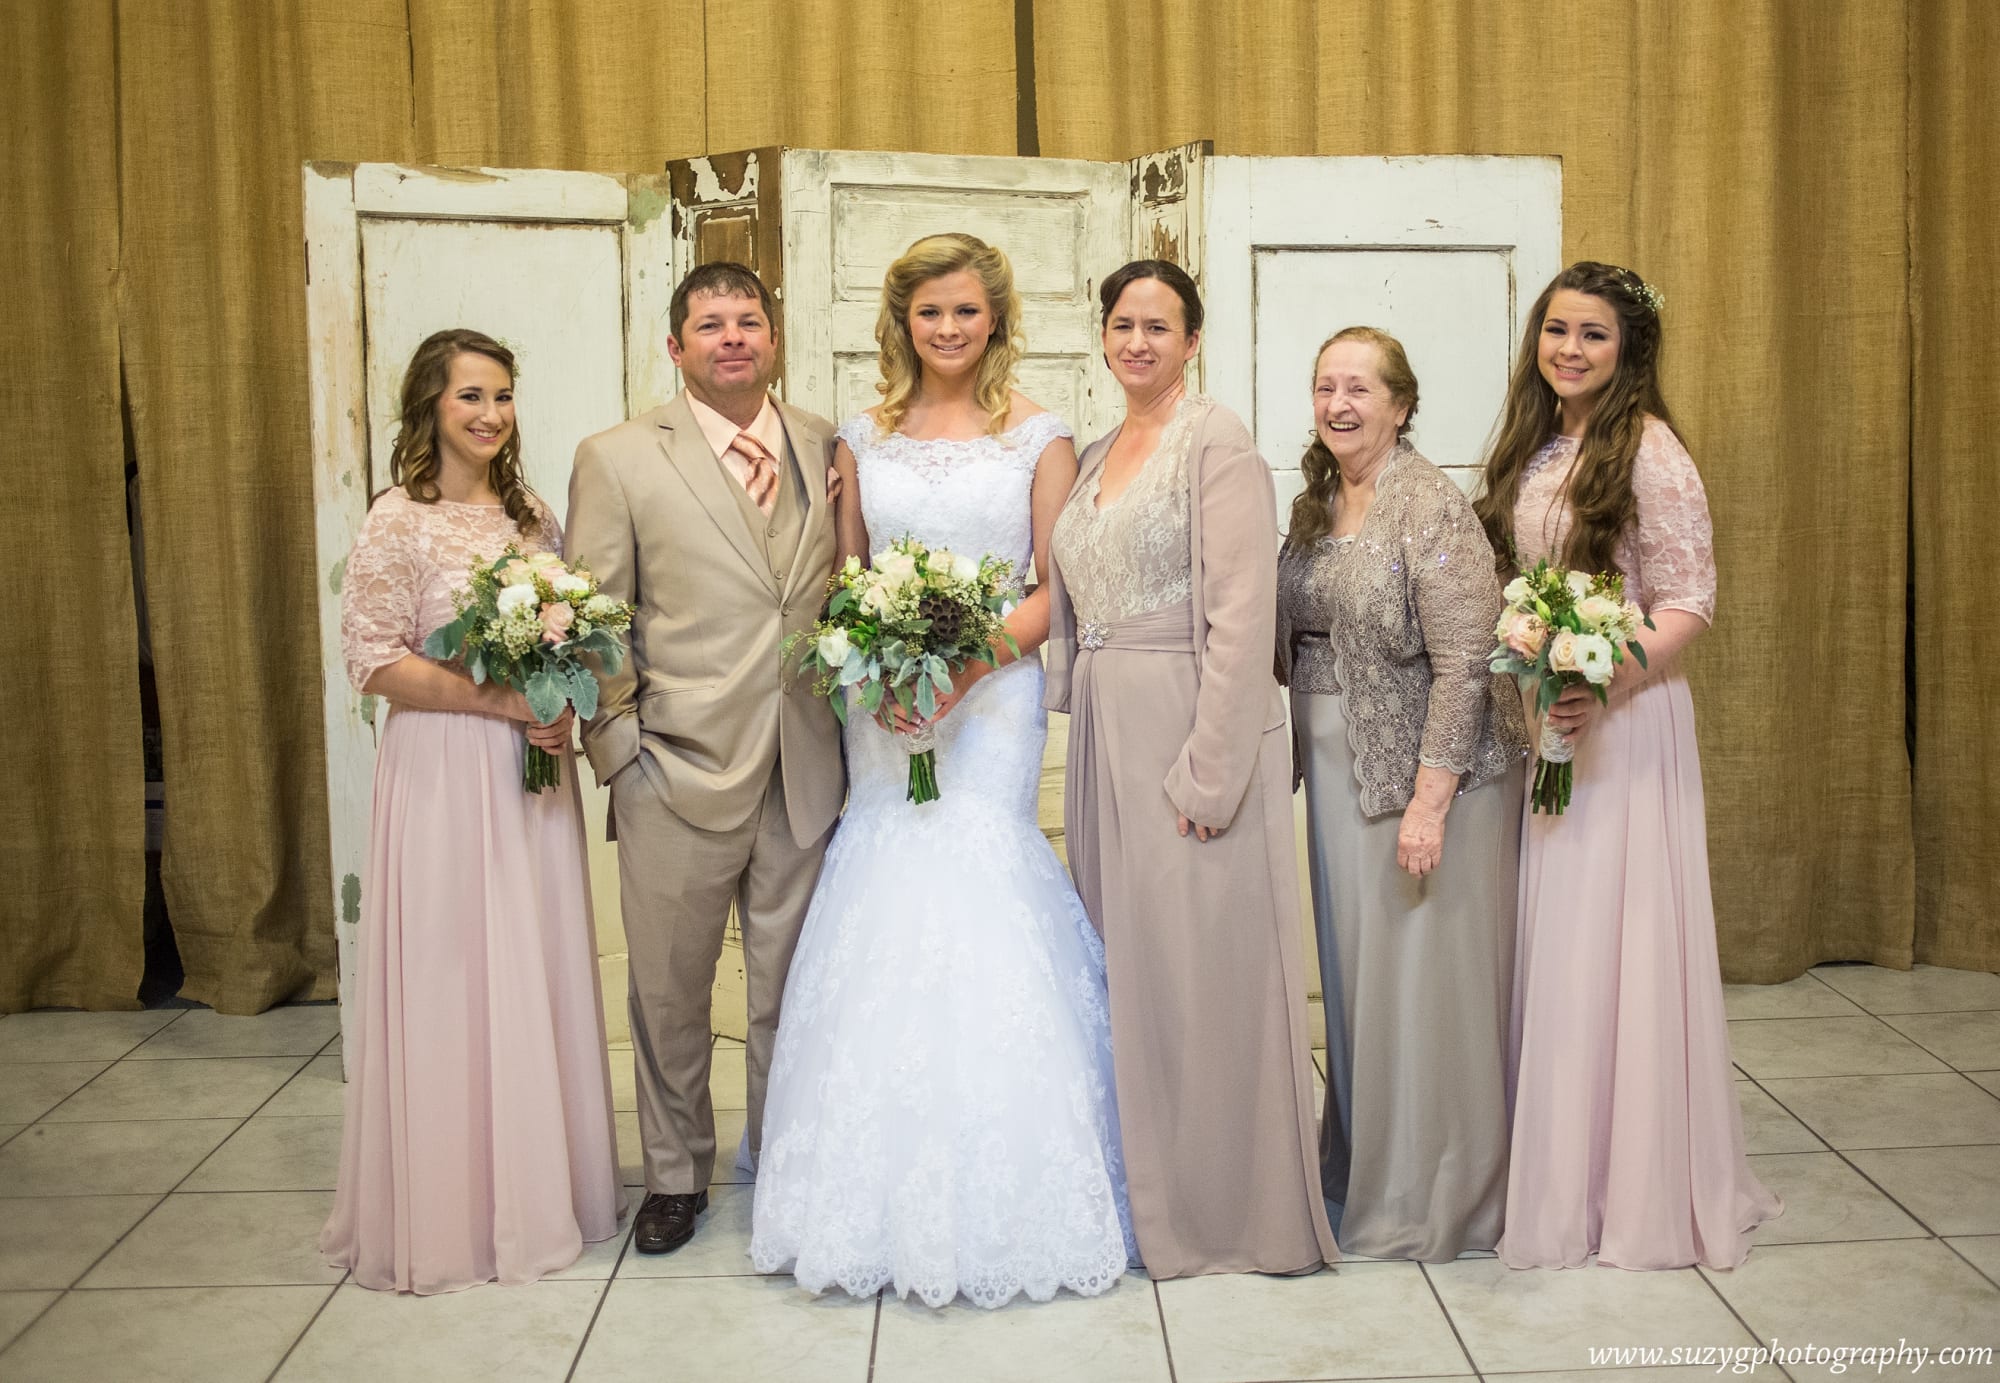 vows by victoria-lake charles-wedding-photography-suzy g-photography-suzygphotography_0031